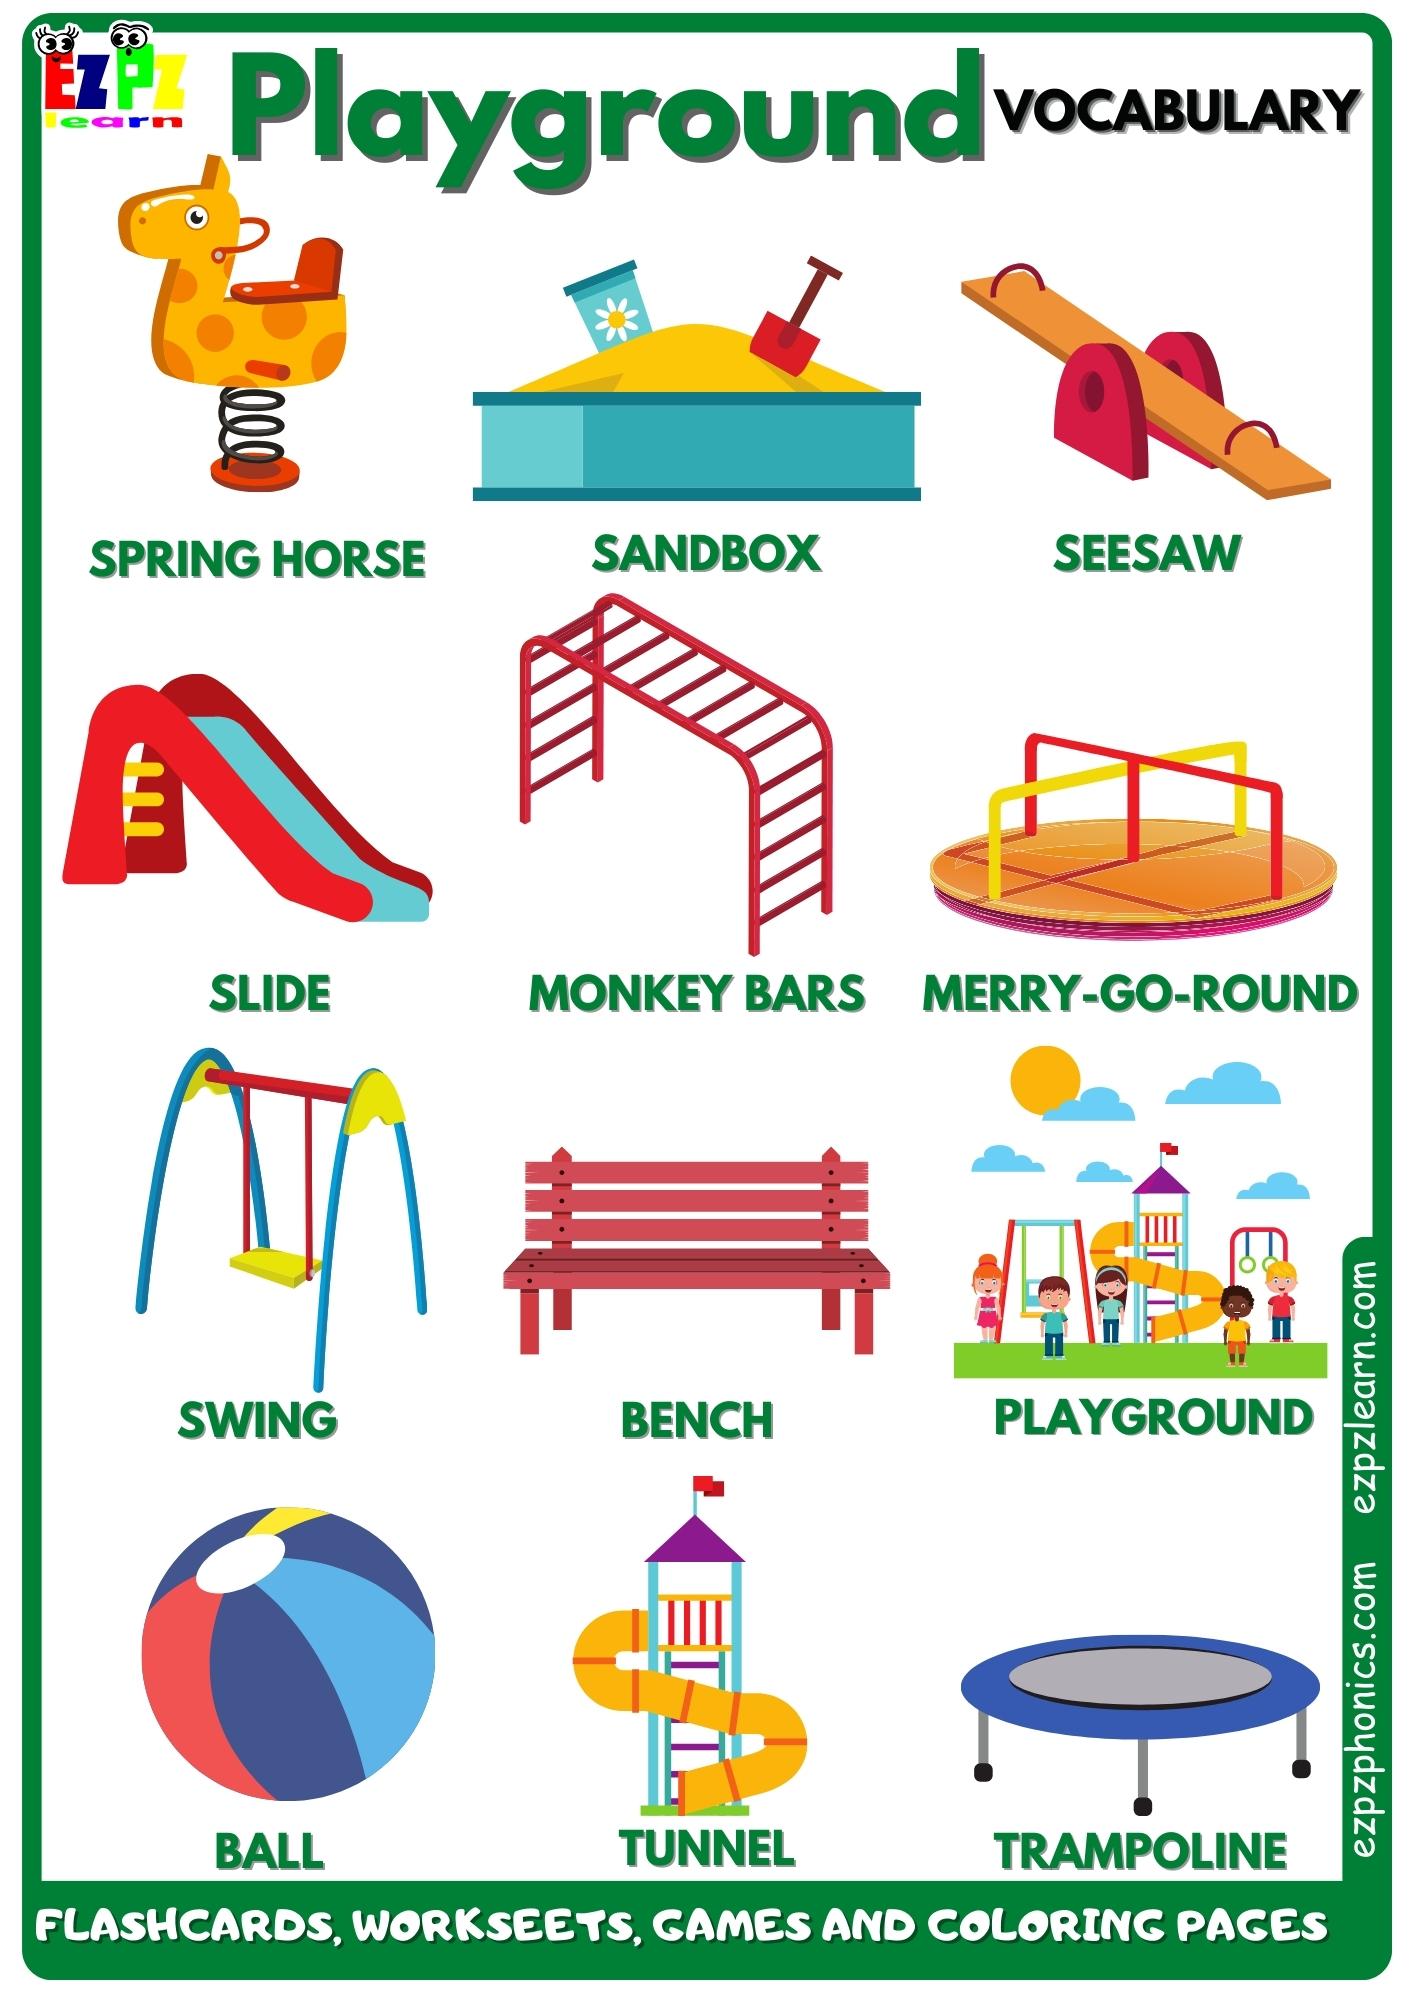 Playground Vocabulary Free English Vocabulary Flashcards, Worksheets,  Coloring Pages, Games and More for Homeschool and English Language Learners  